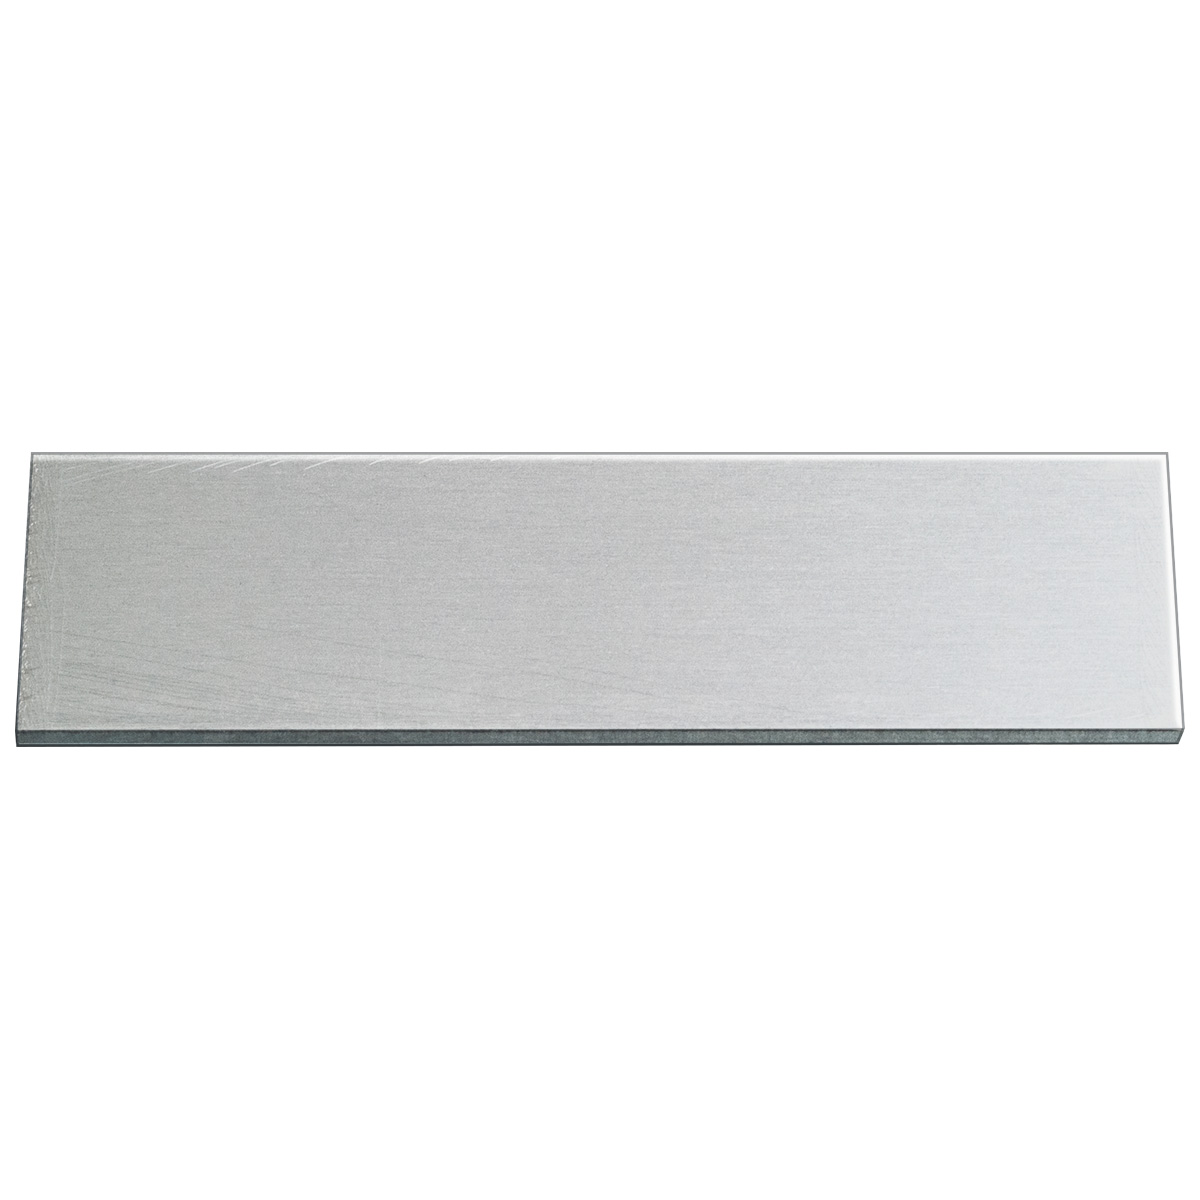 Engraving plate, aluminum, rectangular, 50 x 15 mm, 1 mm thick, with adhesive, no hole